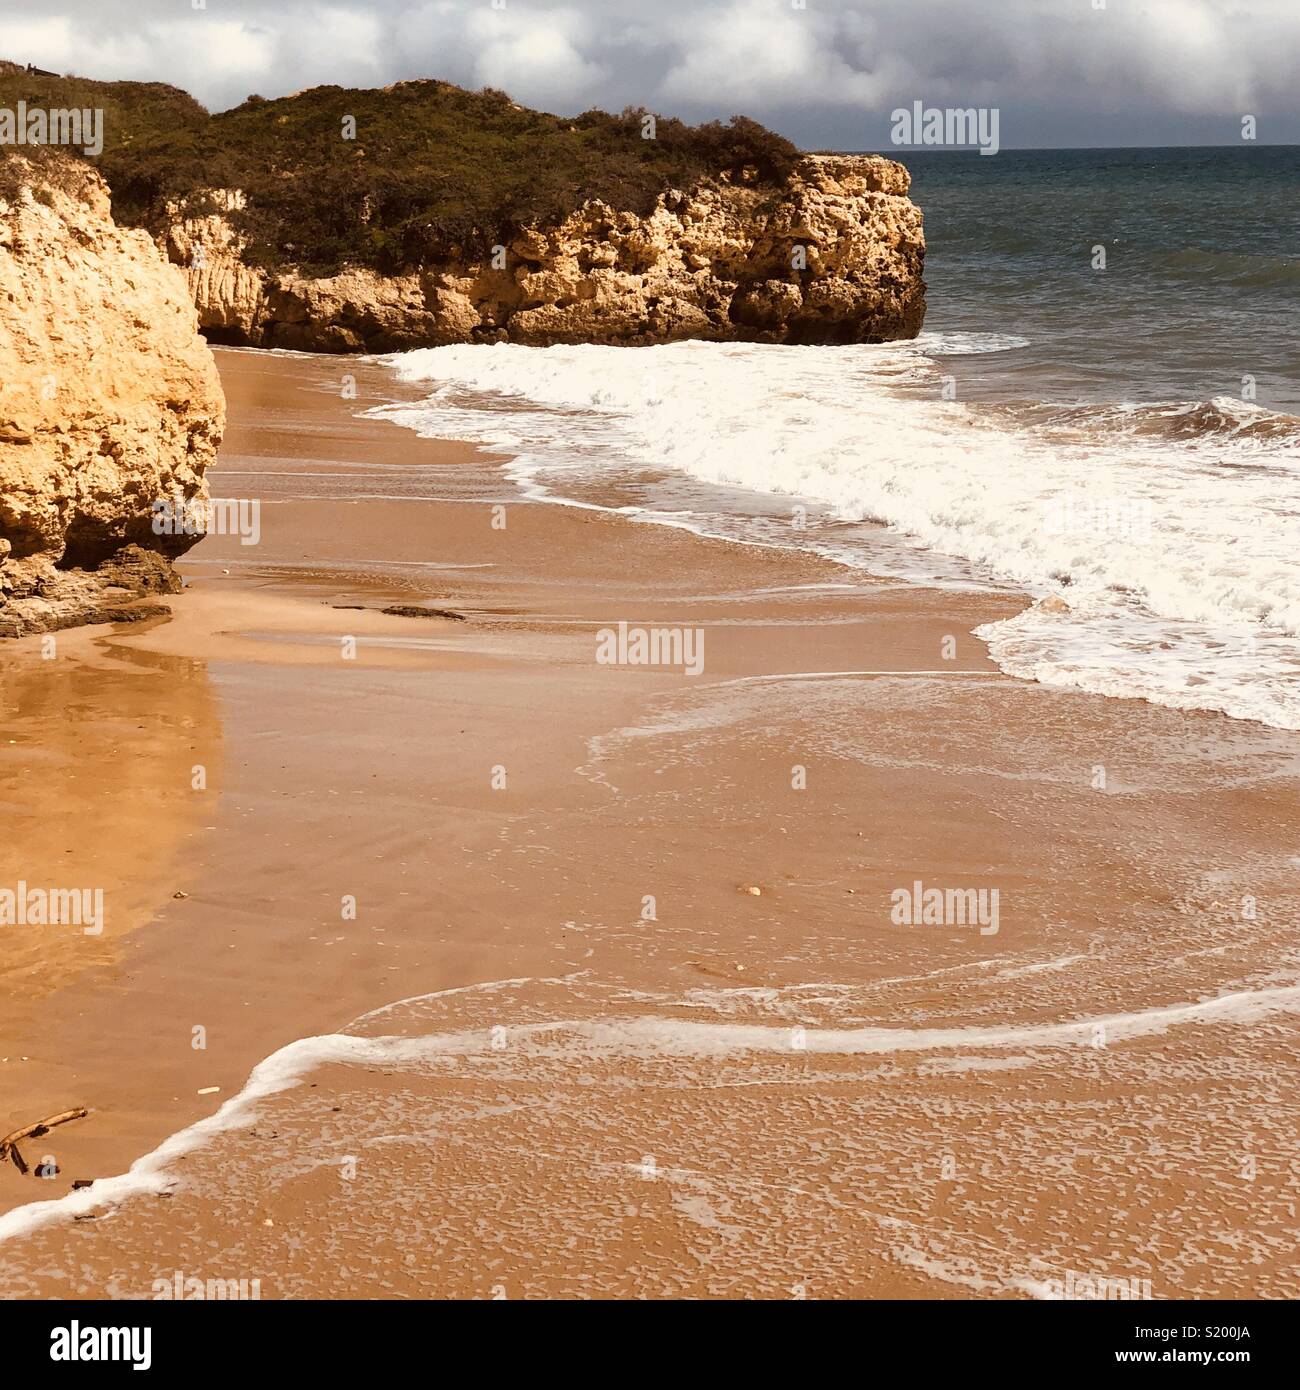 Page 3 - High Tide High Resolution Stock Photography and Images - Alamy